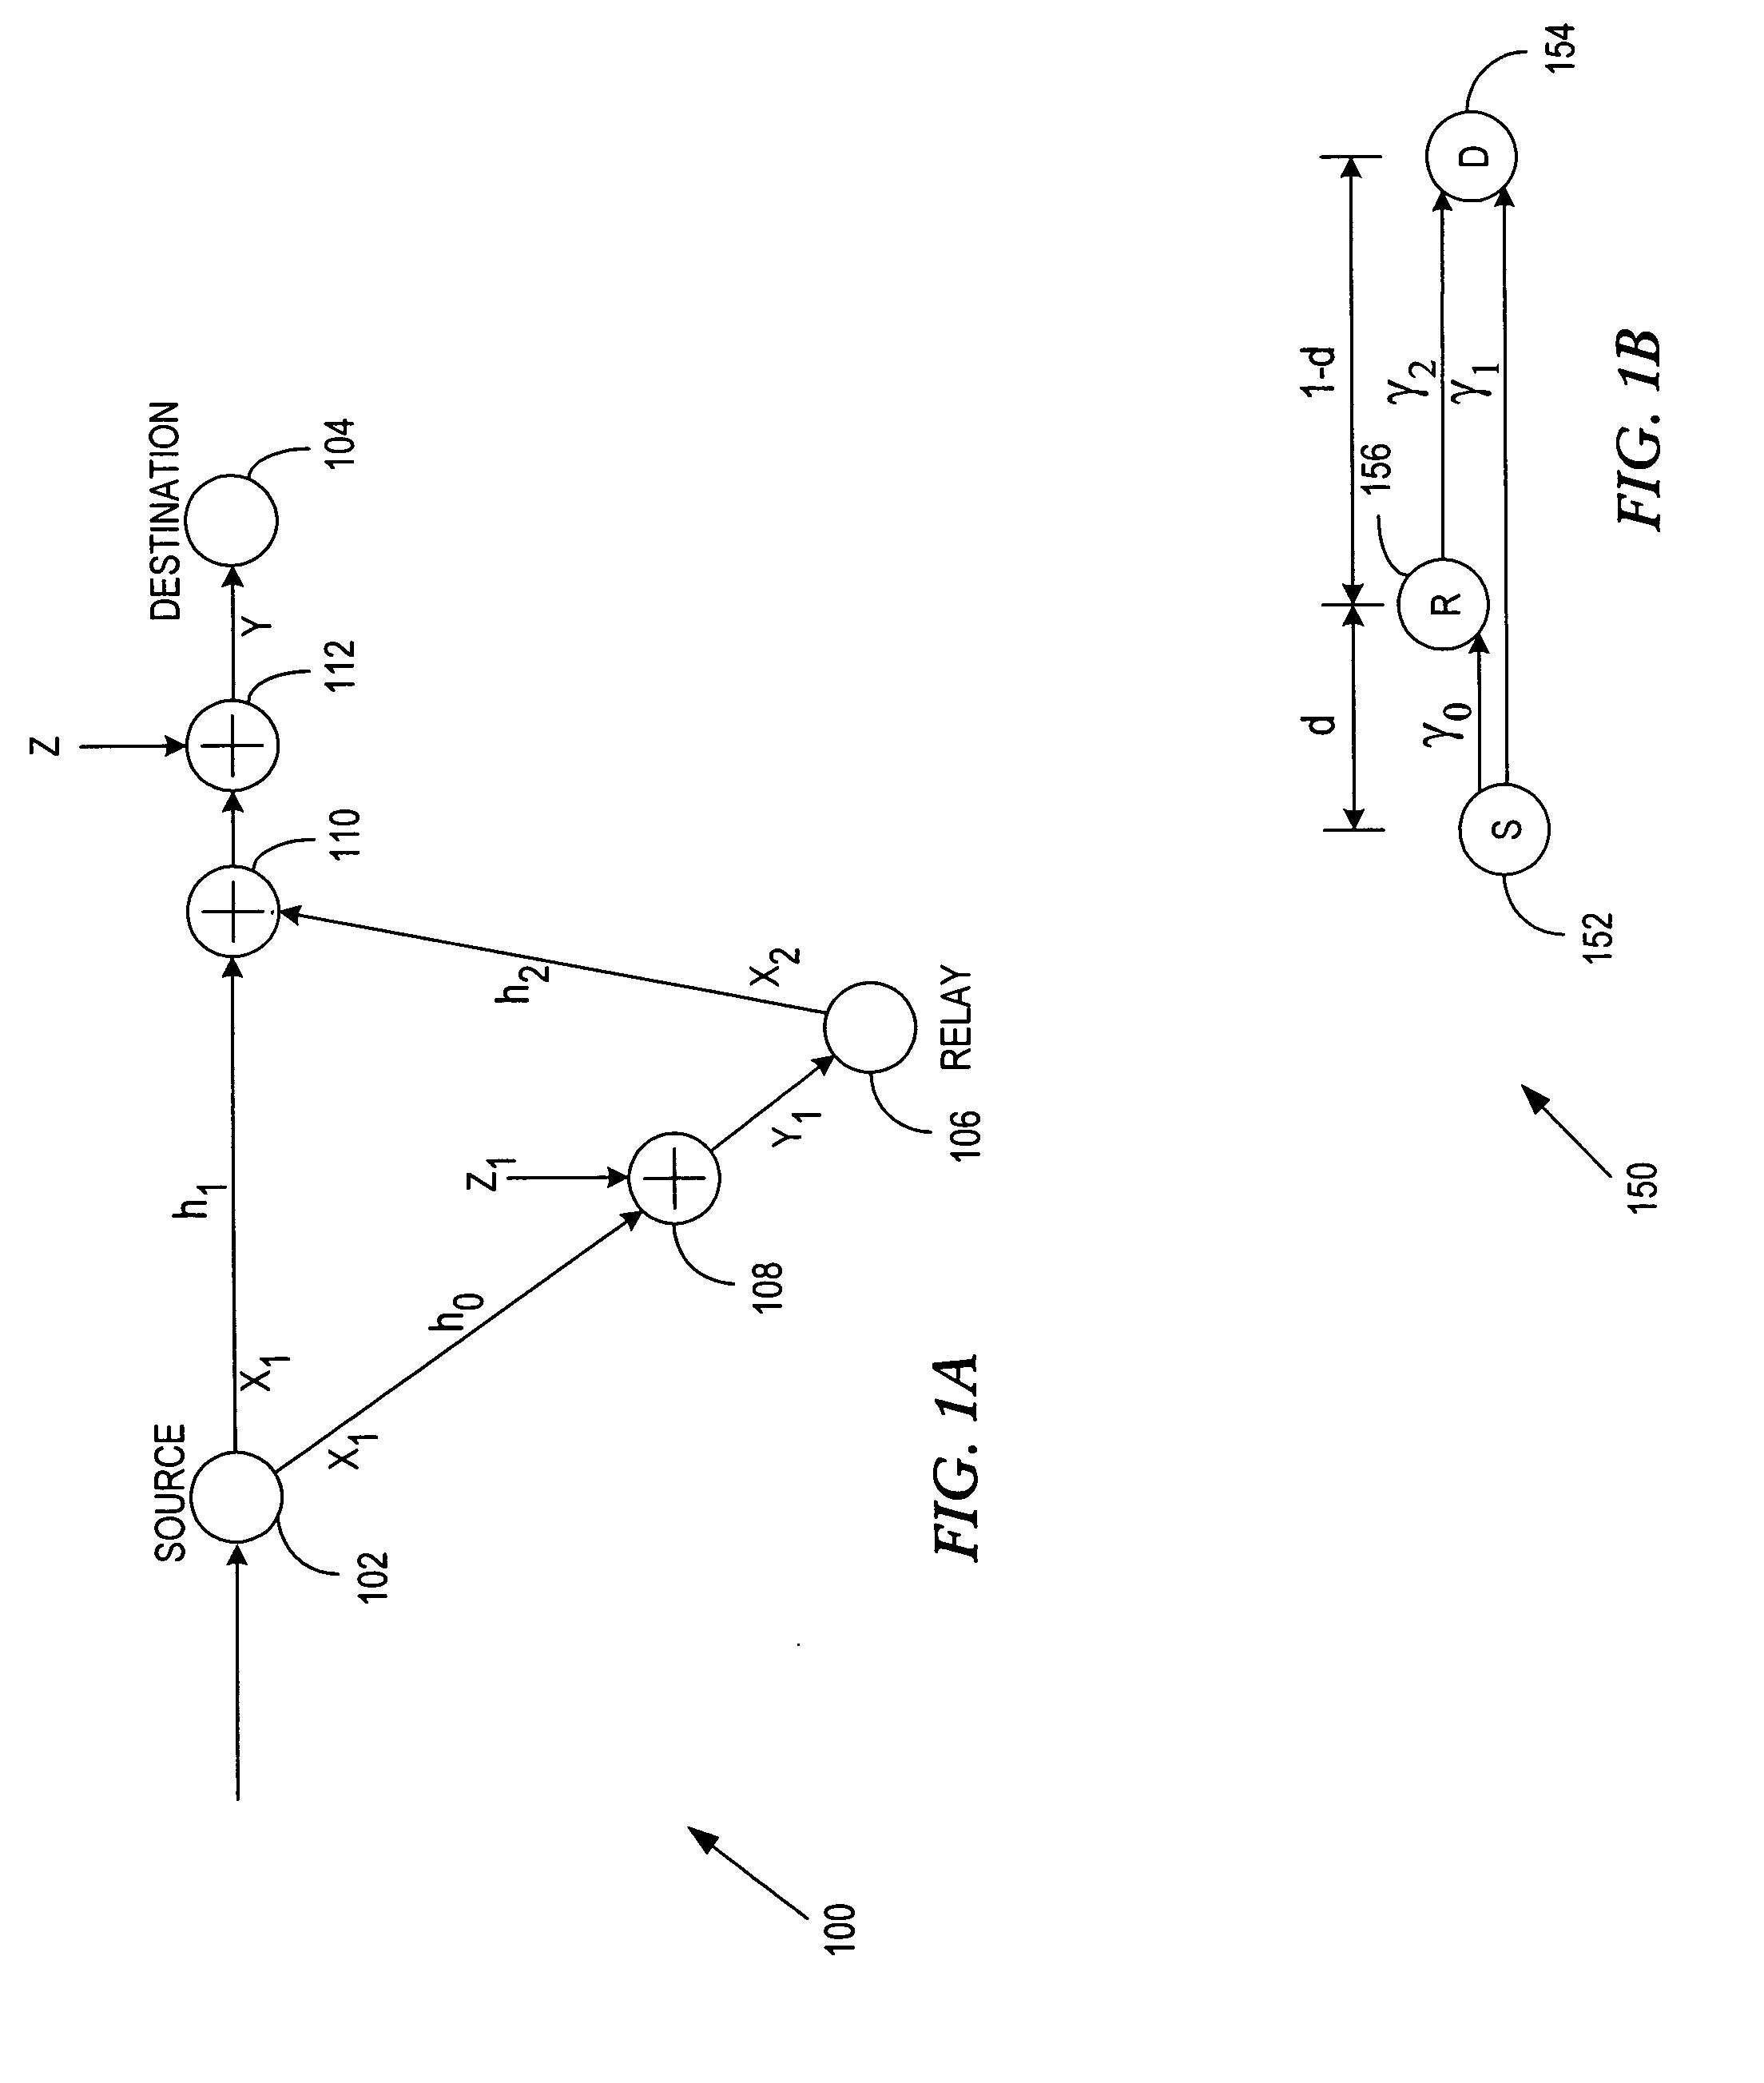 General code design for the relay channel and factor graph decoding